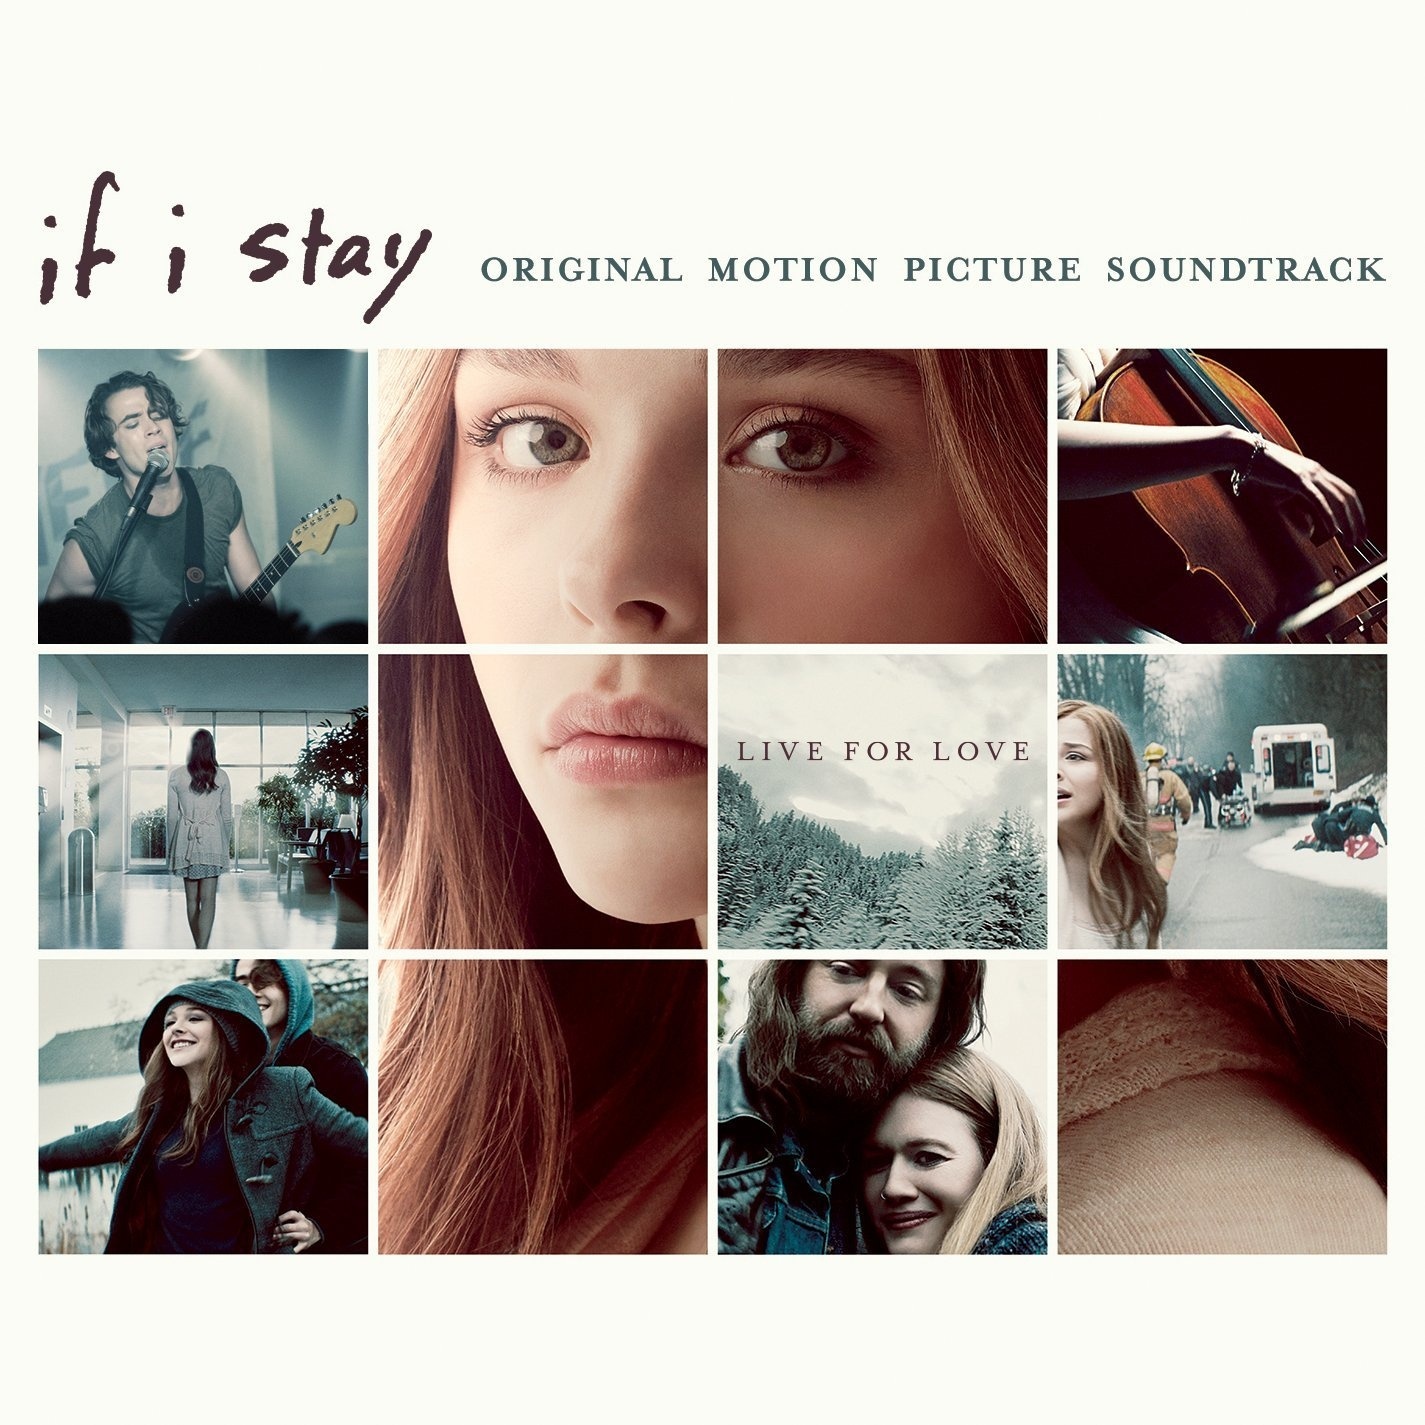 If I Stay (Original Motion Picture Soundtrack)